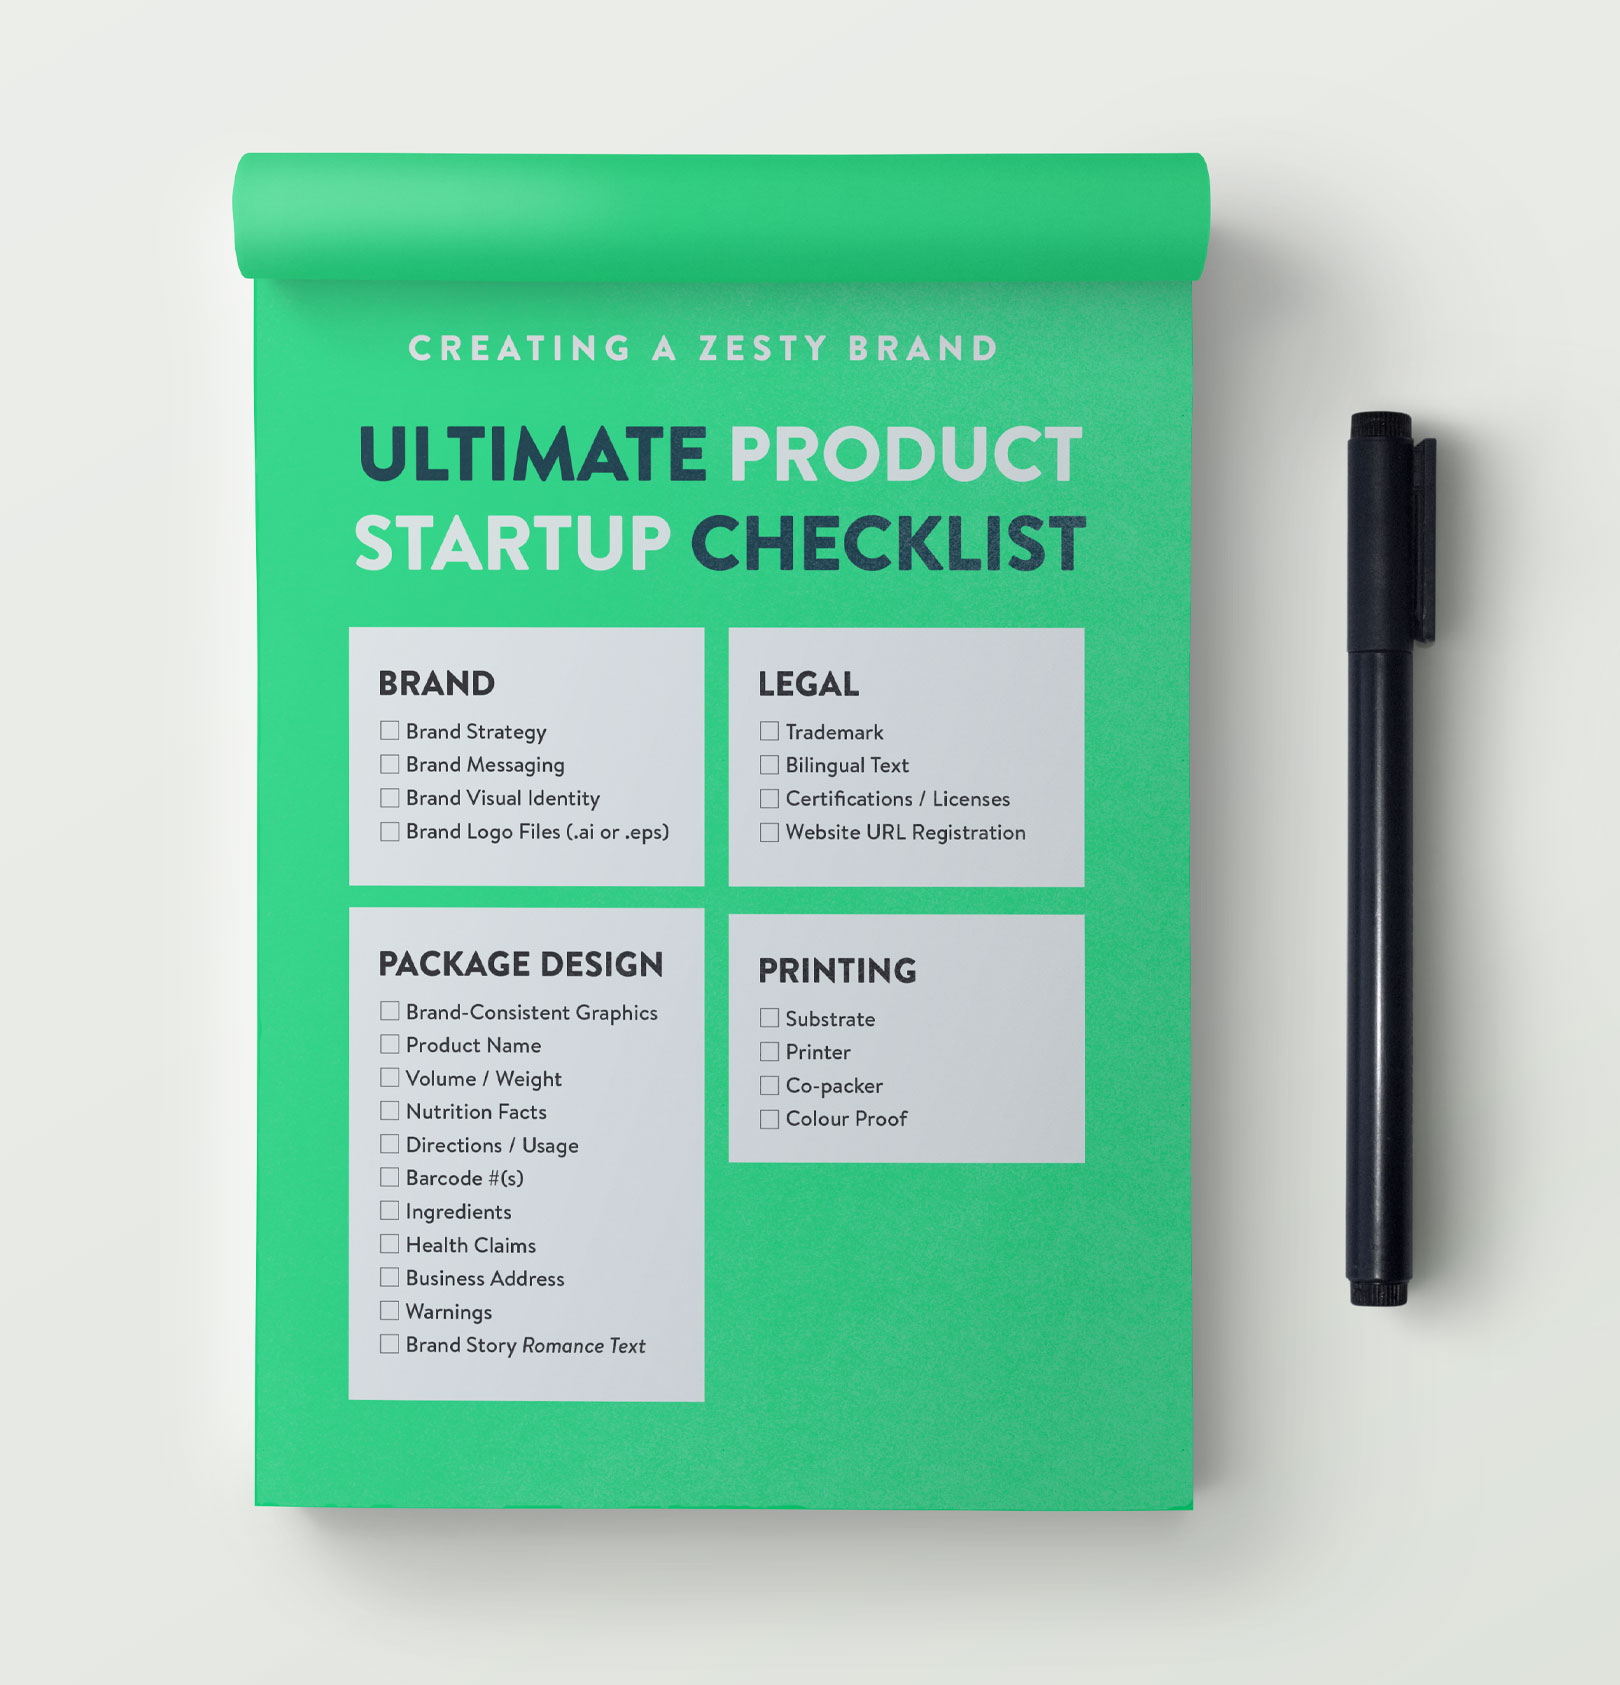 https://zestybrands.ca/wp-content/uploads/2019/05/vancouver-package-design-company-how-to-launch-a-startup-product-brand.jpg